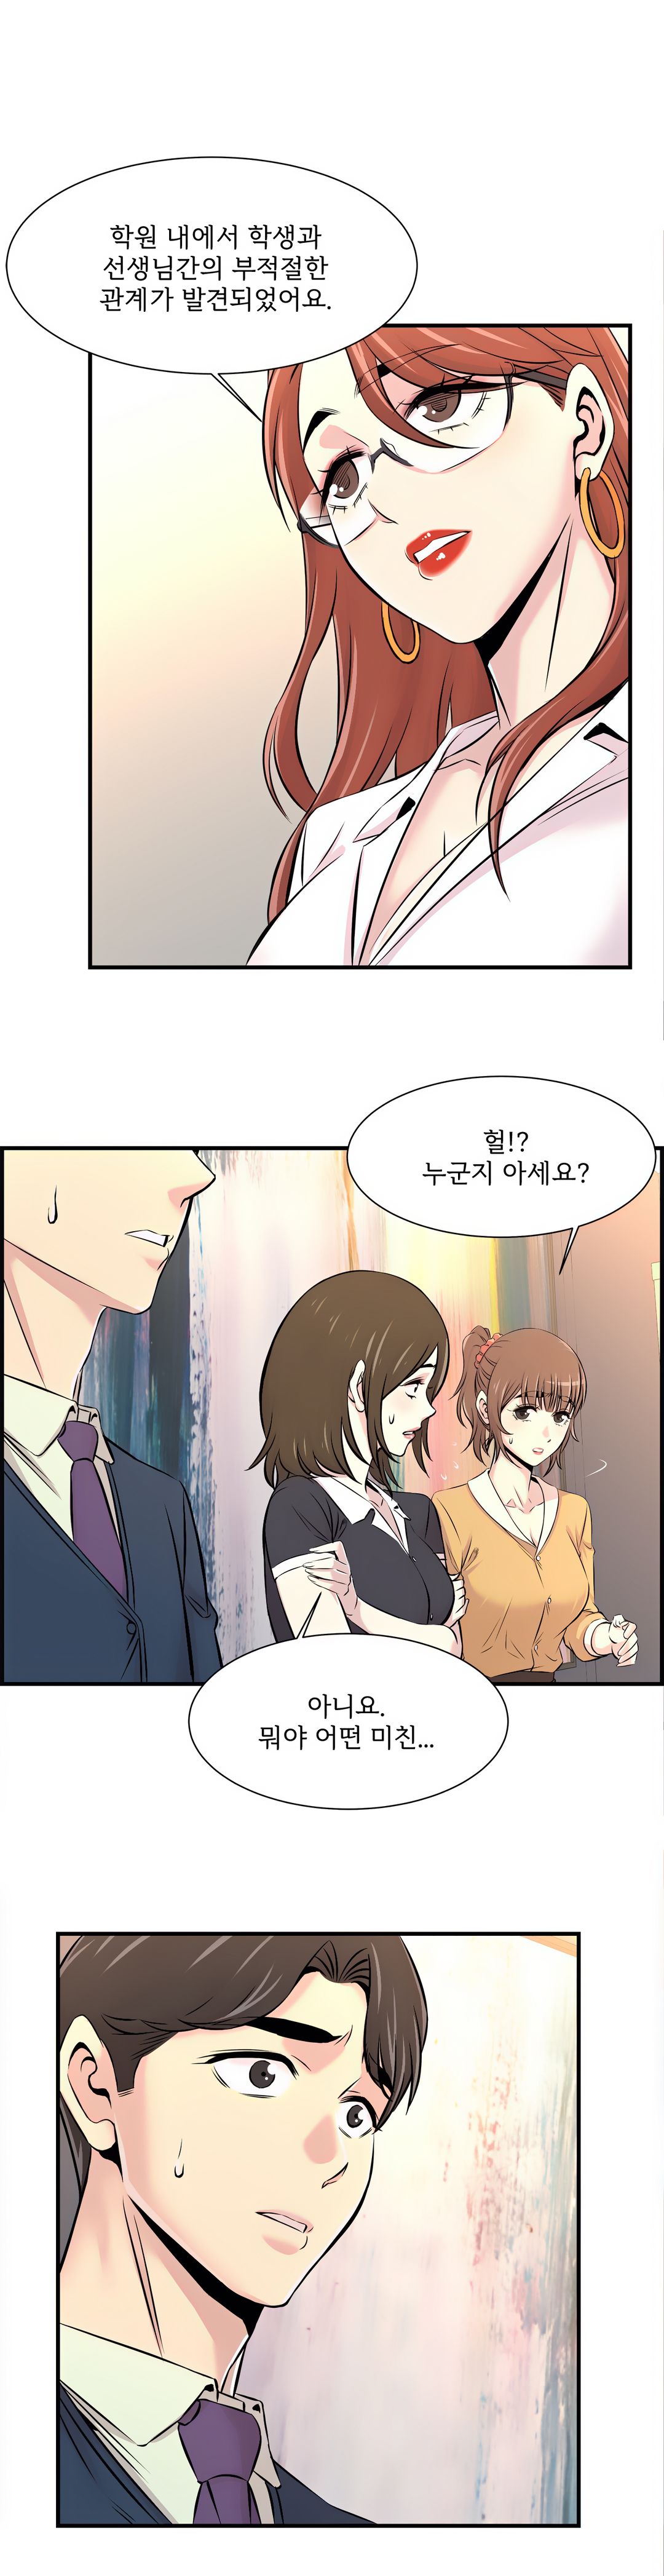 Cram School Scandal Raw - Chapter 13 Page 11